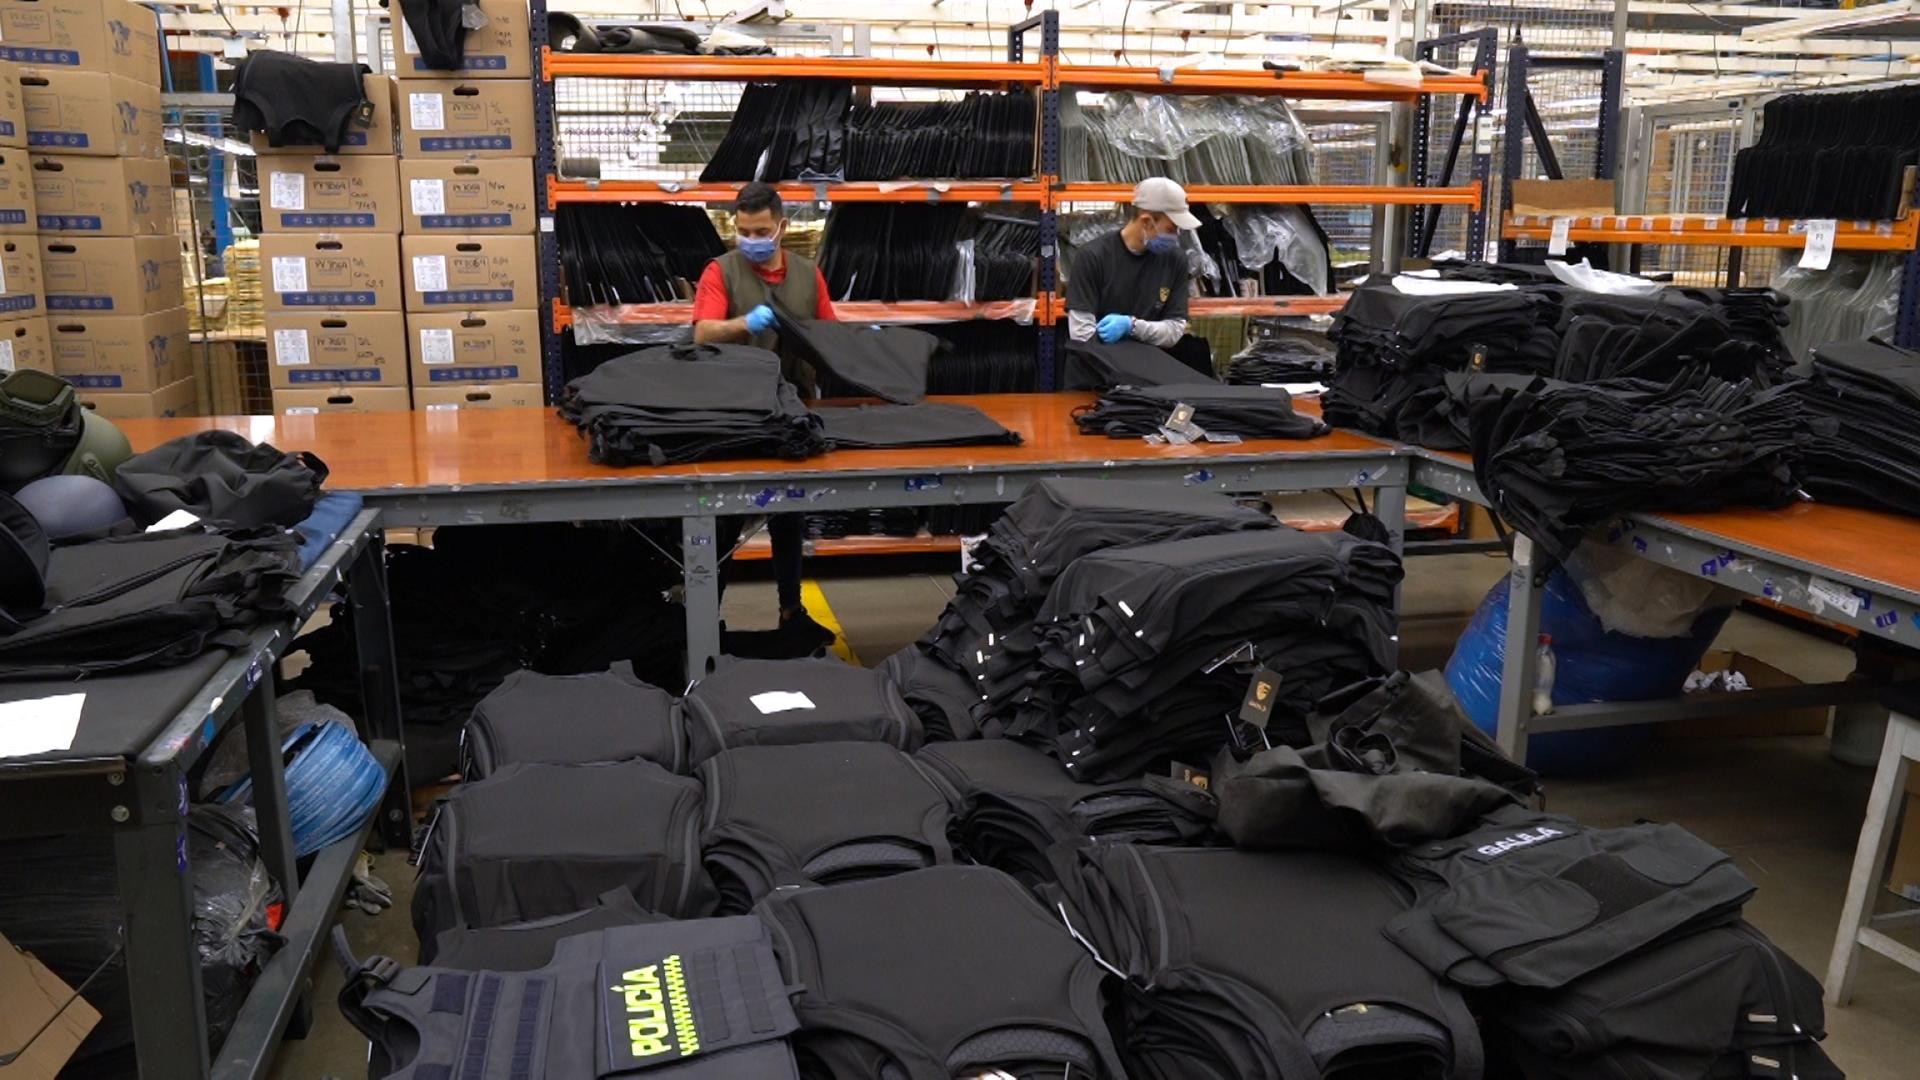 Workers at the MC Armor plant in Colombia making bulletproof vests and other gear.